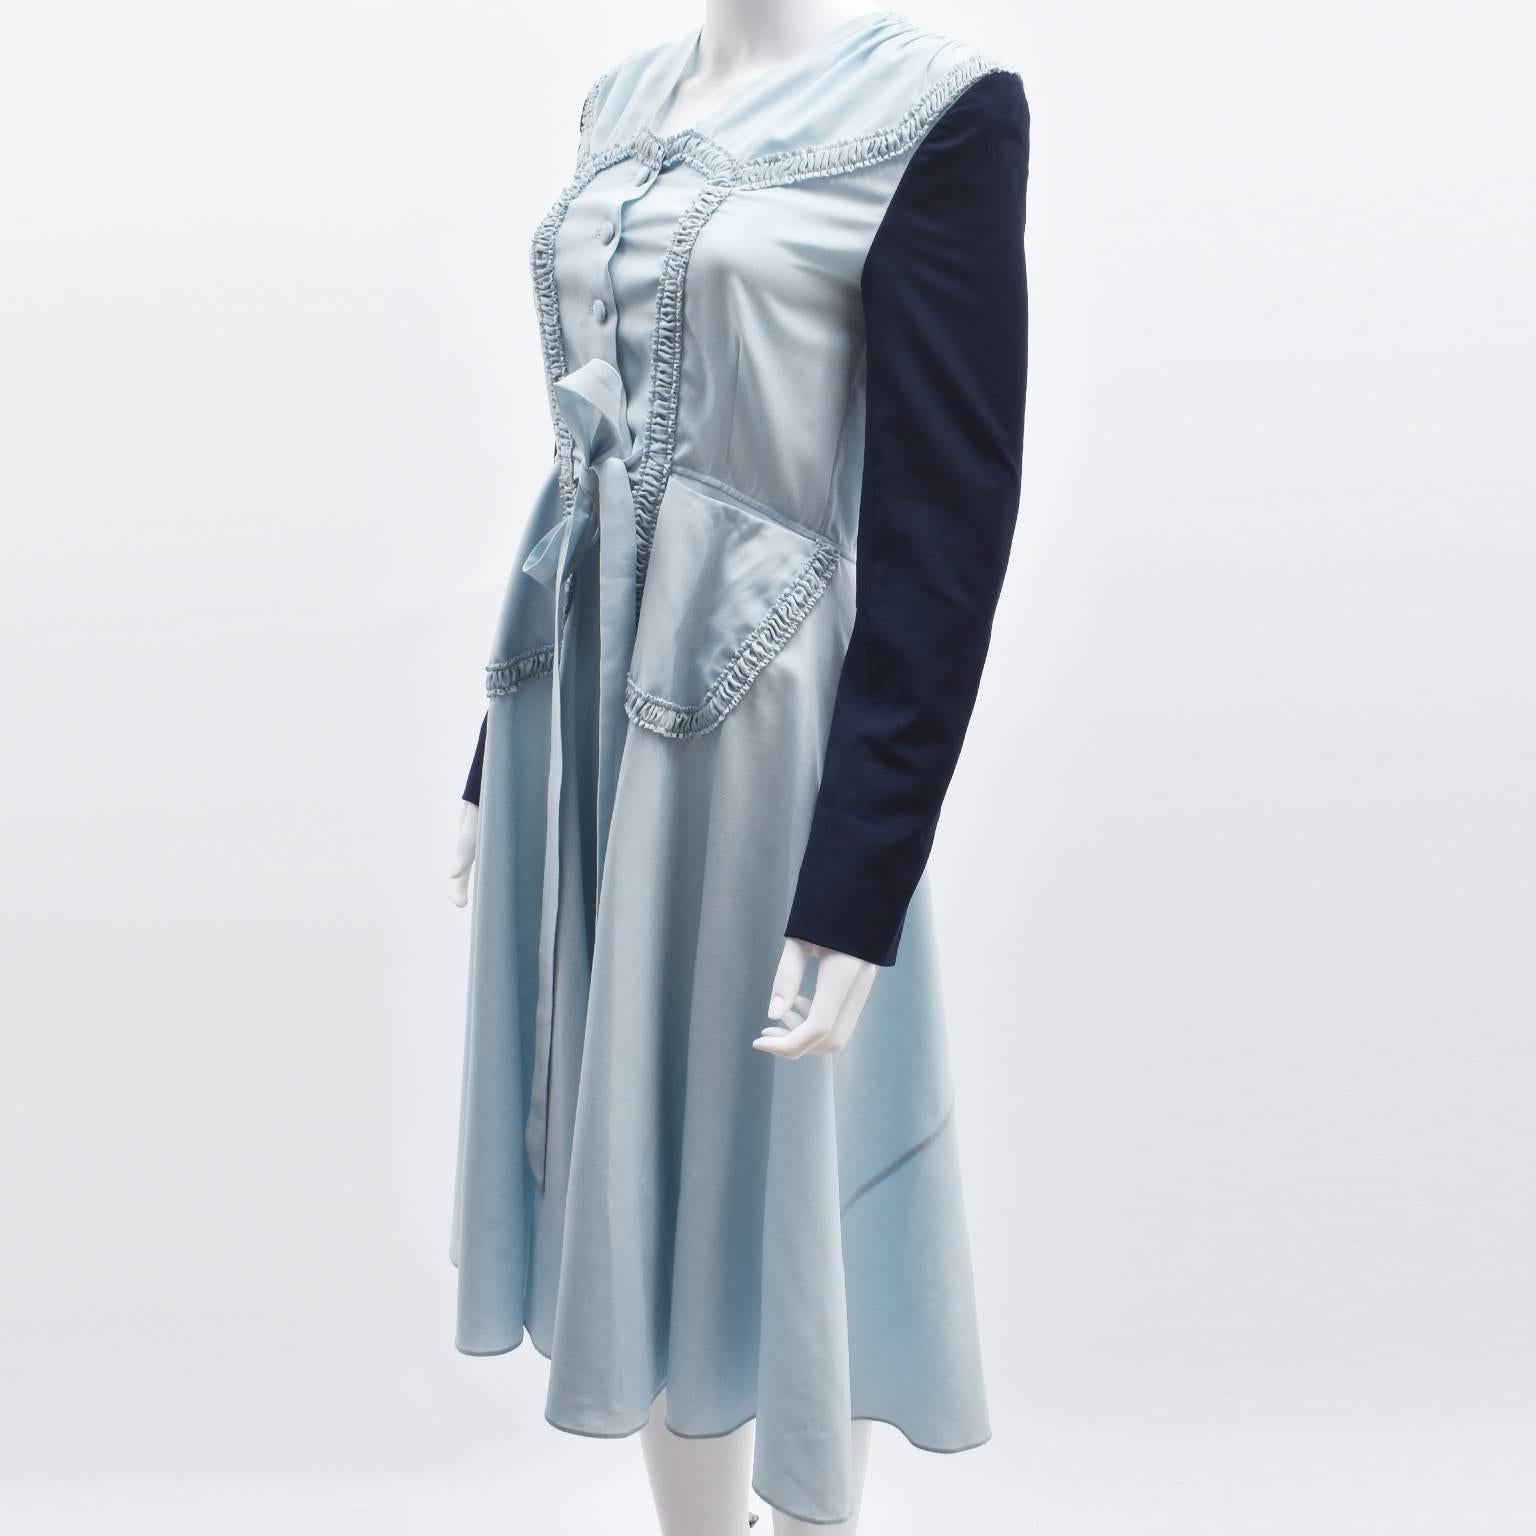 A light blue Maison Margiela dress with a vintage 1940’s silhouette. It has a fitted waist, tie-belt, shoulder pads, and ruching details on the front. Like most Margiela pieces, the dress has some unusual features, such as contrast navy blue jacket